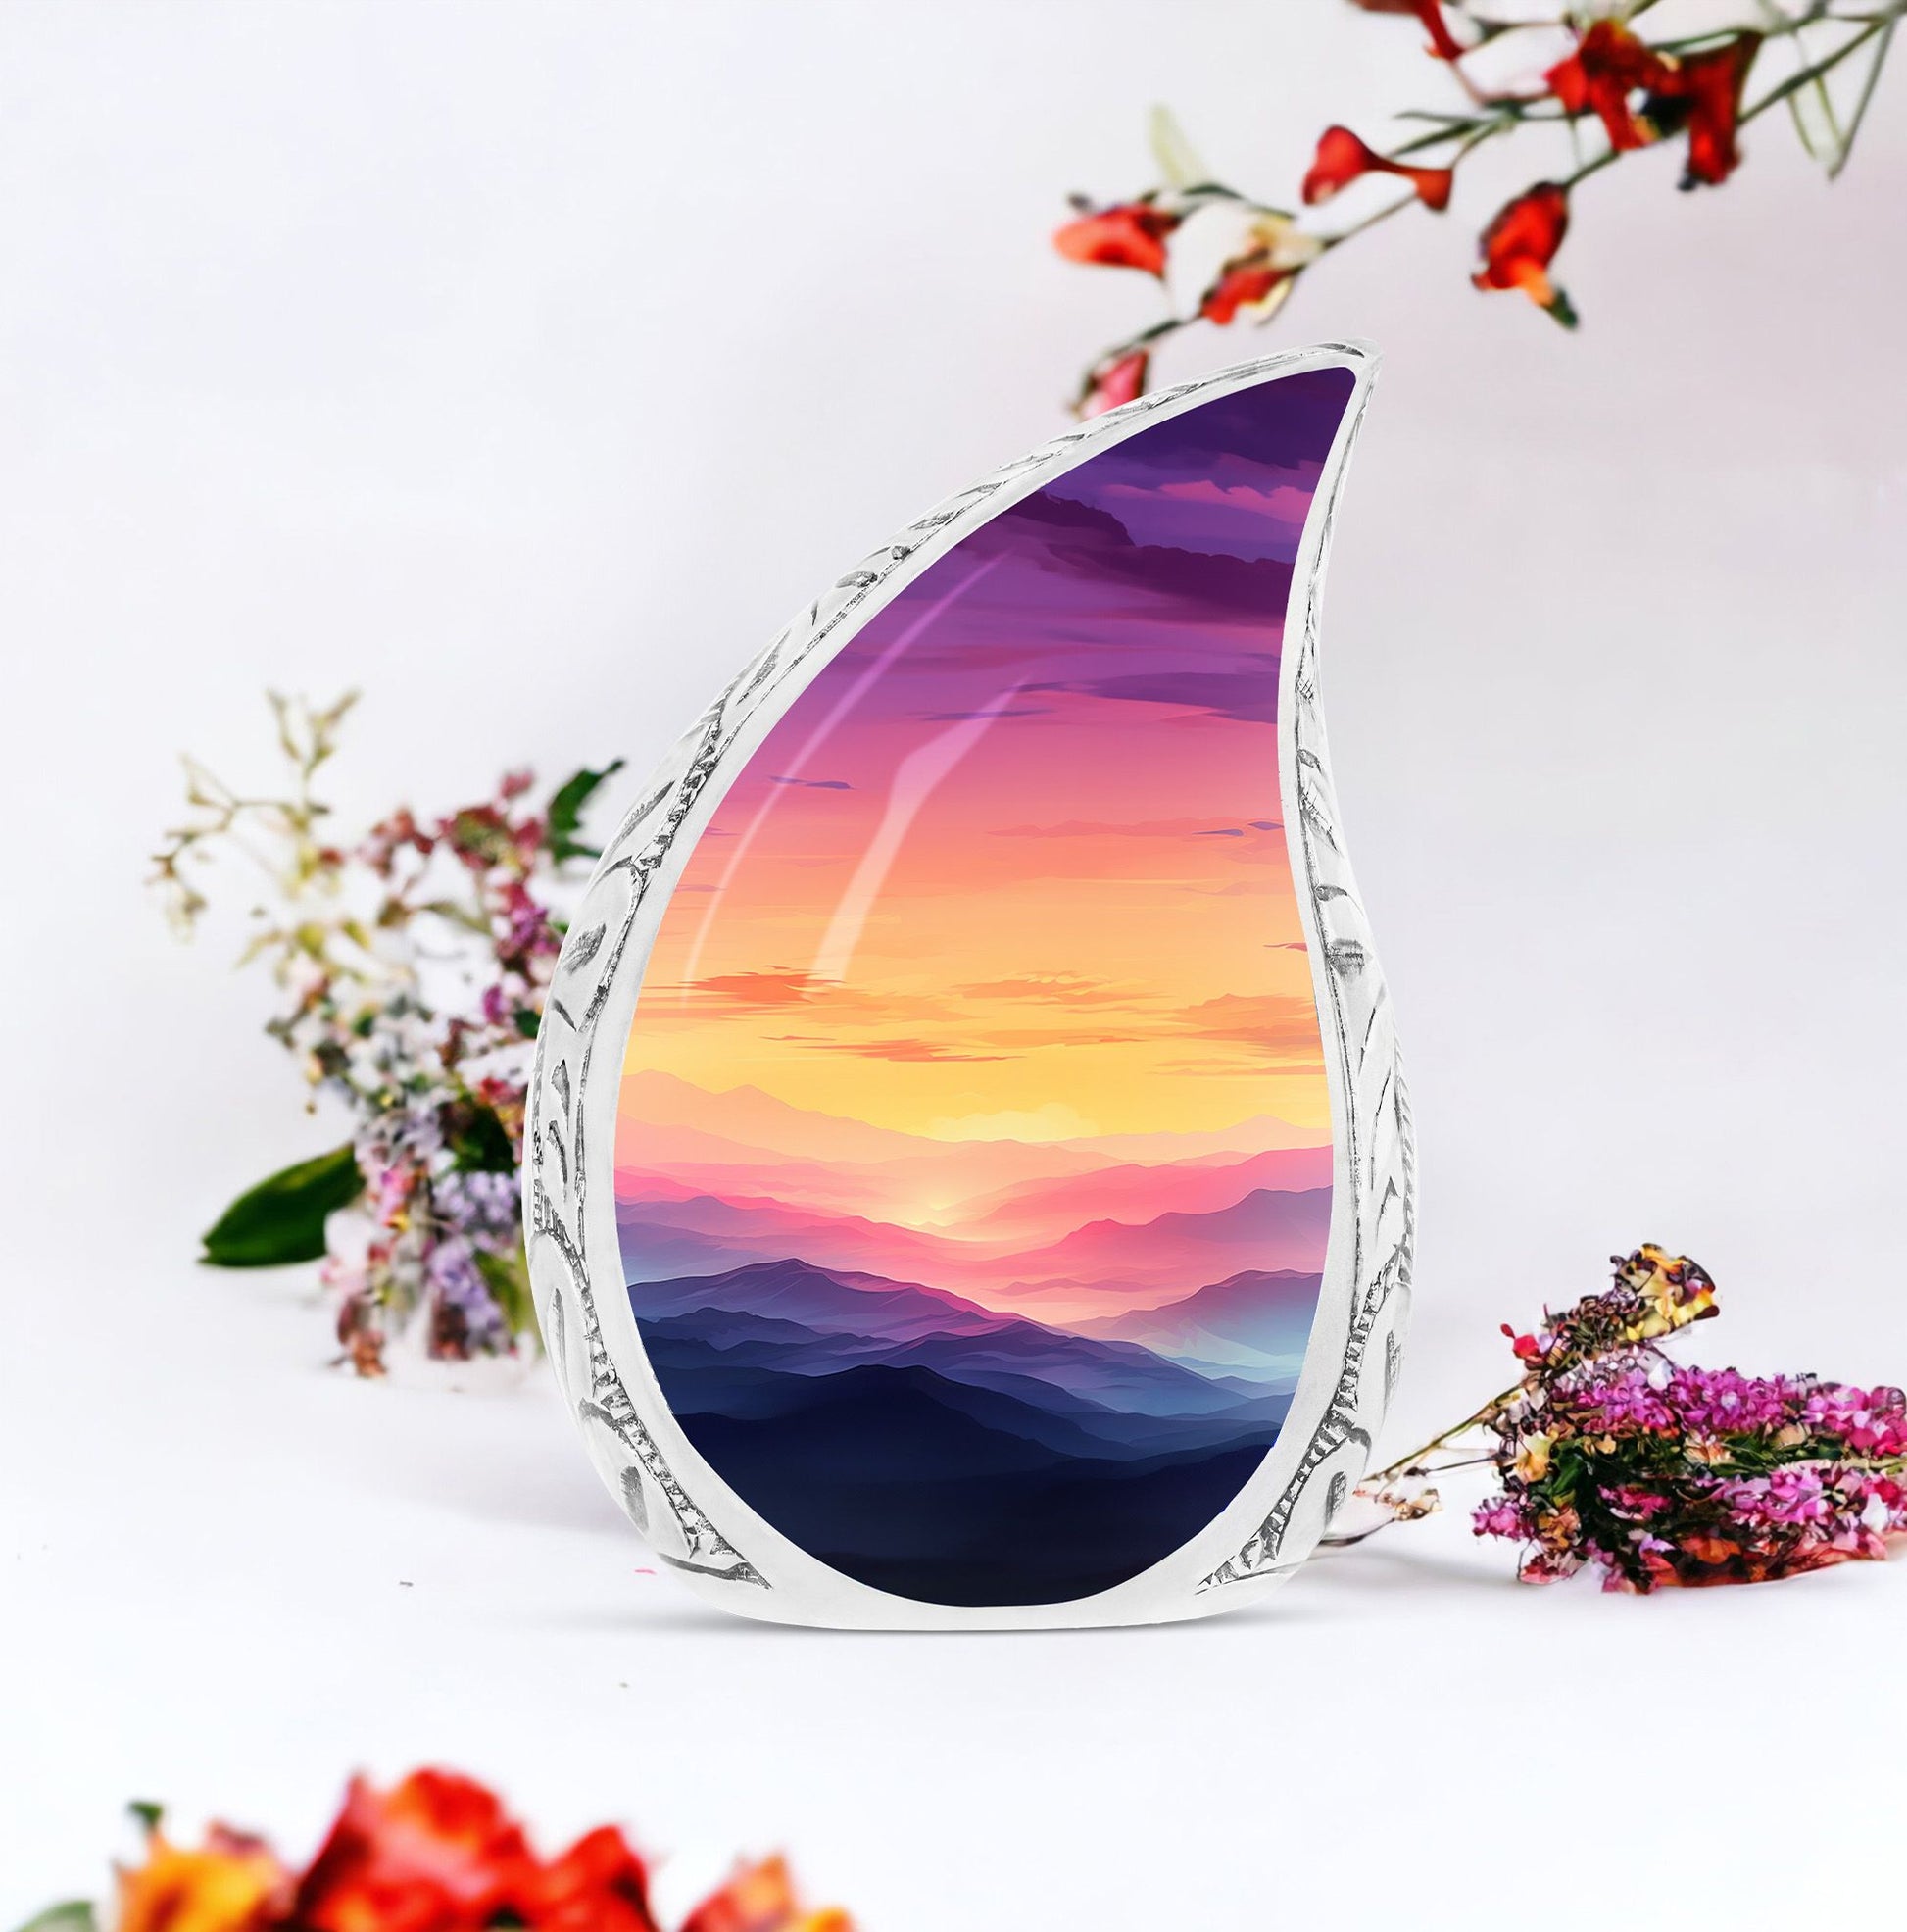 Tear drop shaped mountain urn for ashes, ideal for adult male cremation, functional as a funeral cremation urn or large companion urn